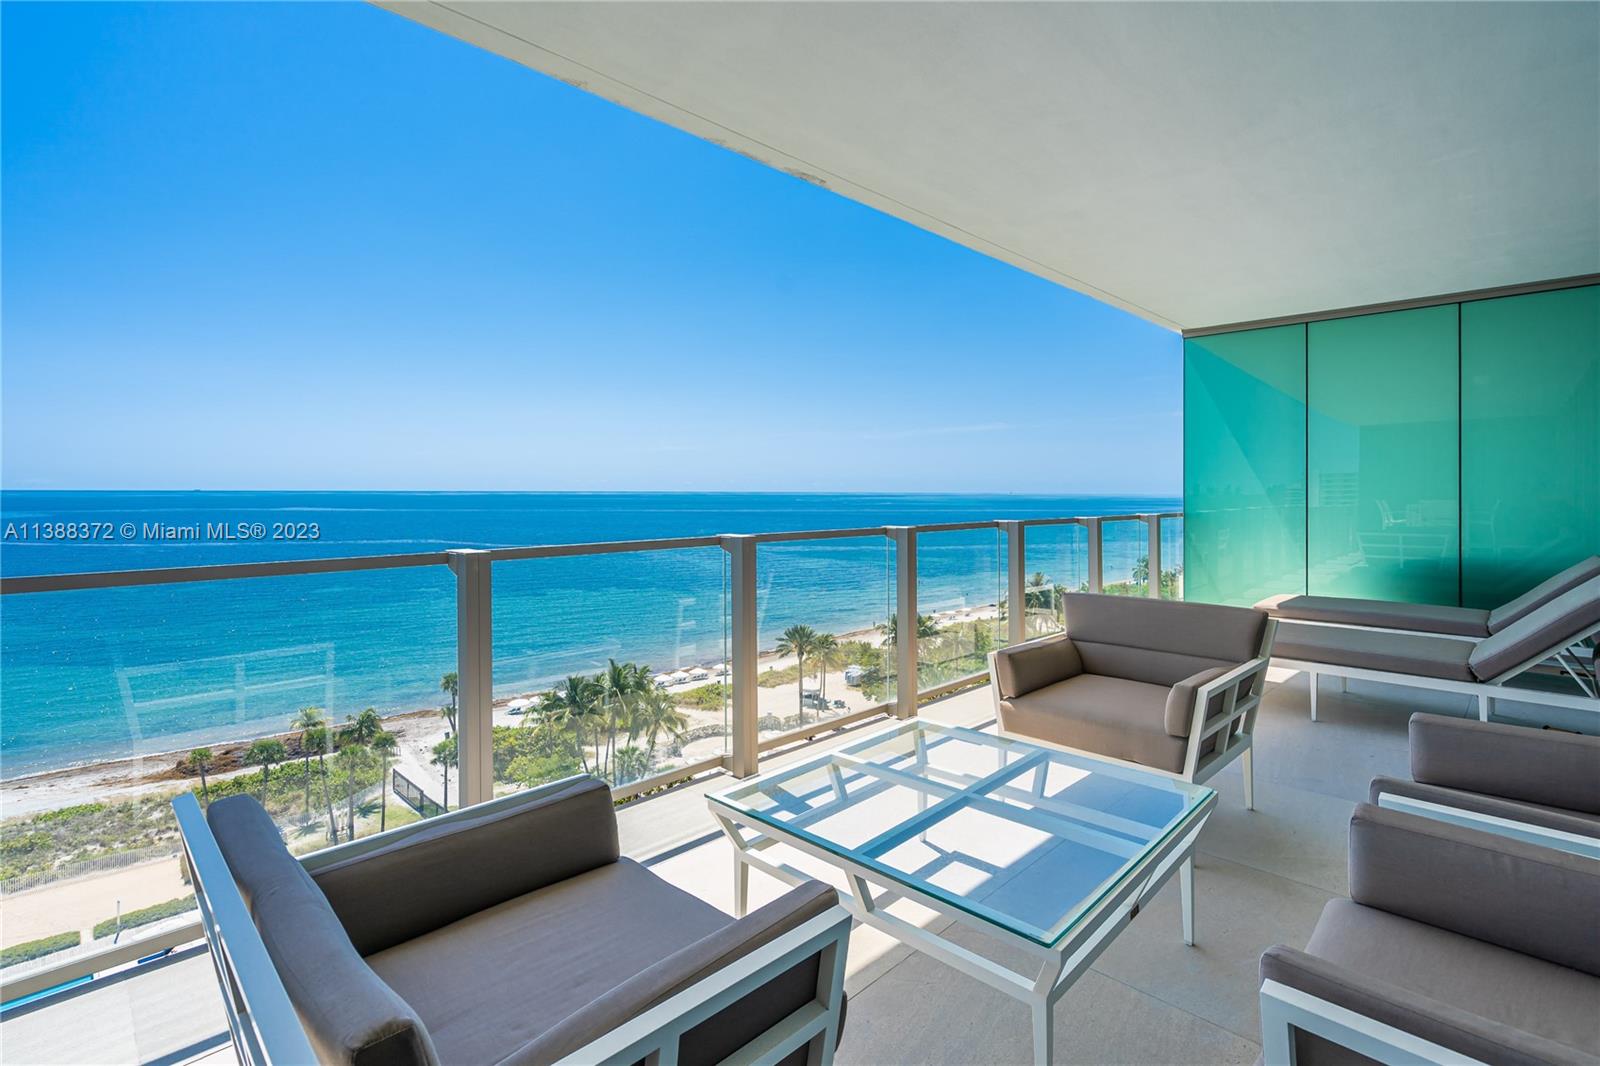 Private elevator opens to one-of-a-kind Beachfront 3BR + Family room + Staff, 5.5BA, 3,600sf unit at the exclusive Oceana in Key Biscayne. Enjoy breathtaking views from this finely finished flow-through unit, encompassing sparkling city views and serene beach views through floor-to-ceiling windows and expansive terraces. Finely finished and fully automized home, with all walls featuring wood panels, wallpapers &amp; venetian plaster, linear AC ducts, integrated speakers, Italian doors. Kitchen features long island w/Miele &amp; Subzero appl. &amp; wine cooler. Oceana offers a grand pool and exercise pool, beach services, al-fresco beachfront Restaurant, Tennis court, gym and spa with ocean views, kids playroom, party &amp; media rooms, 24hr security &amp; valet and volleyball on its 500 ft private beach.